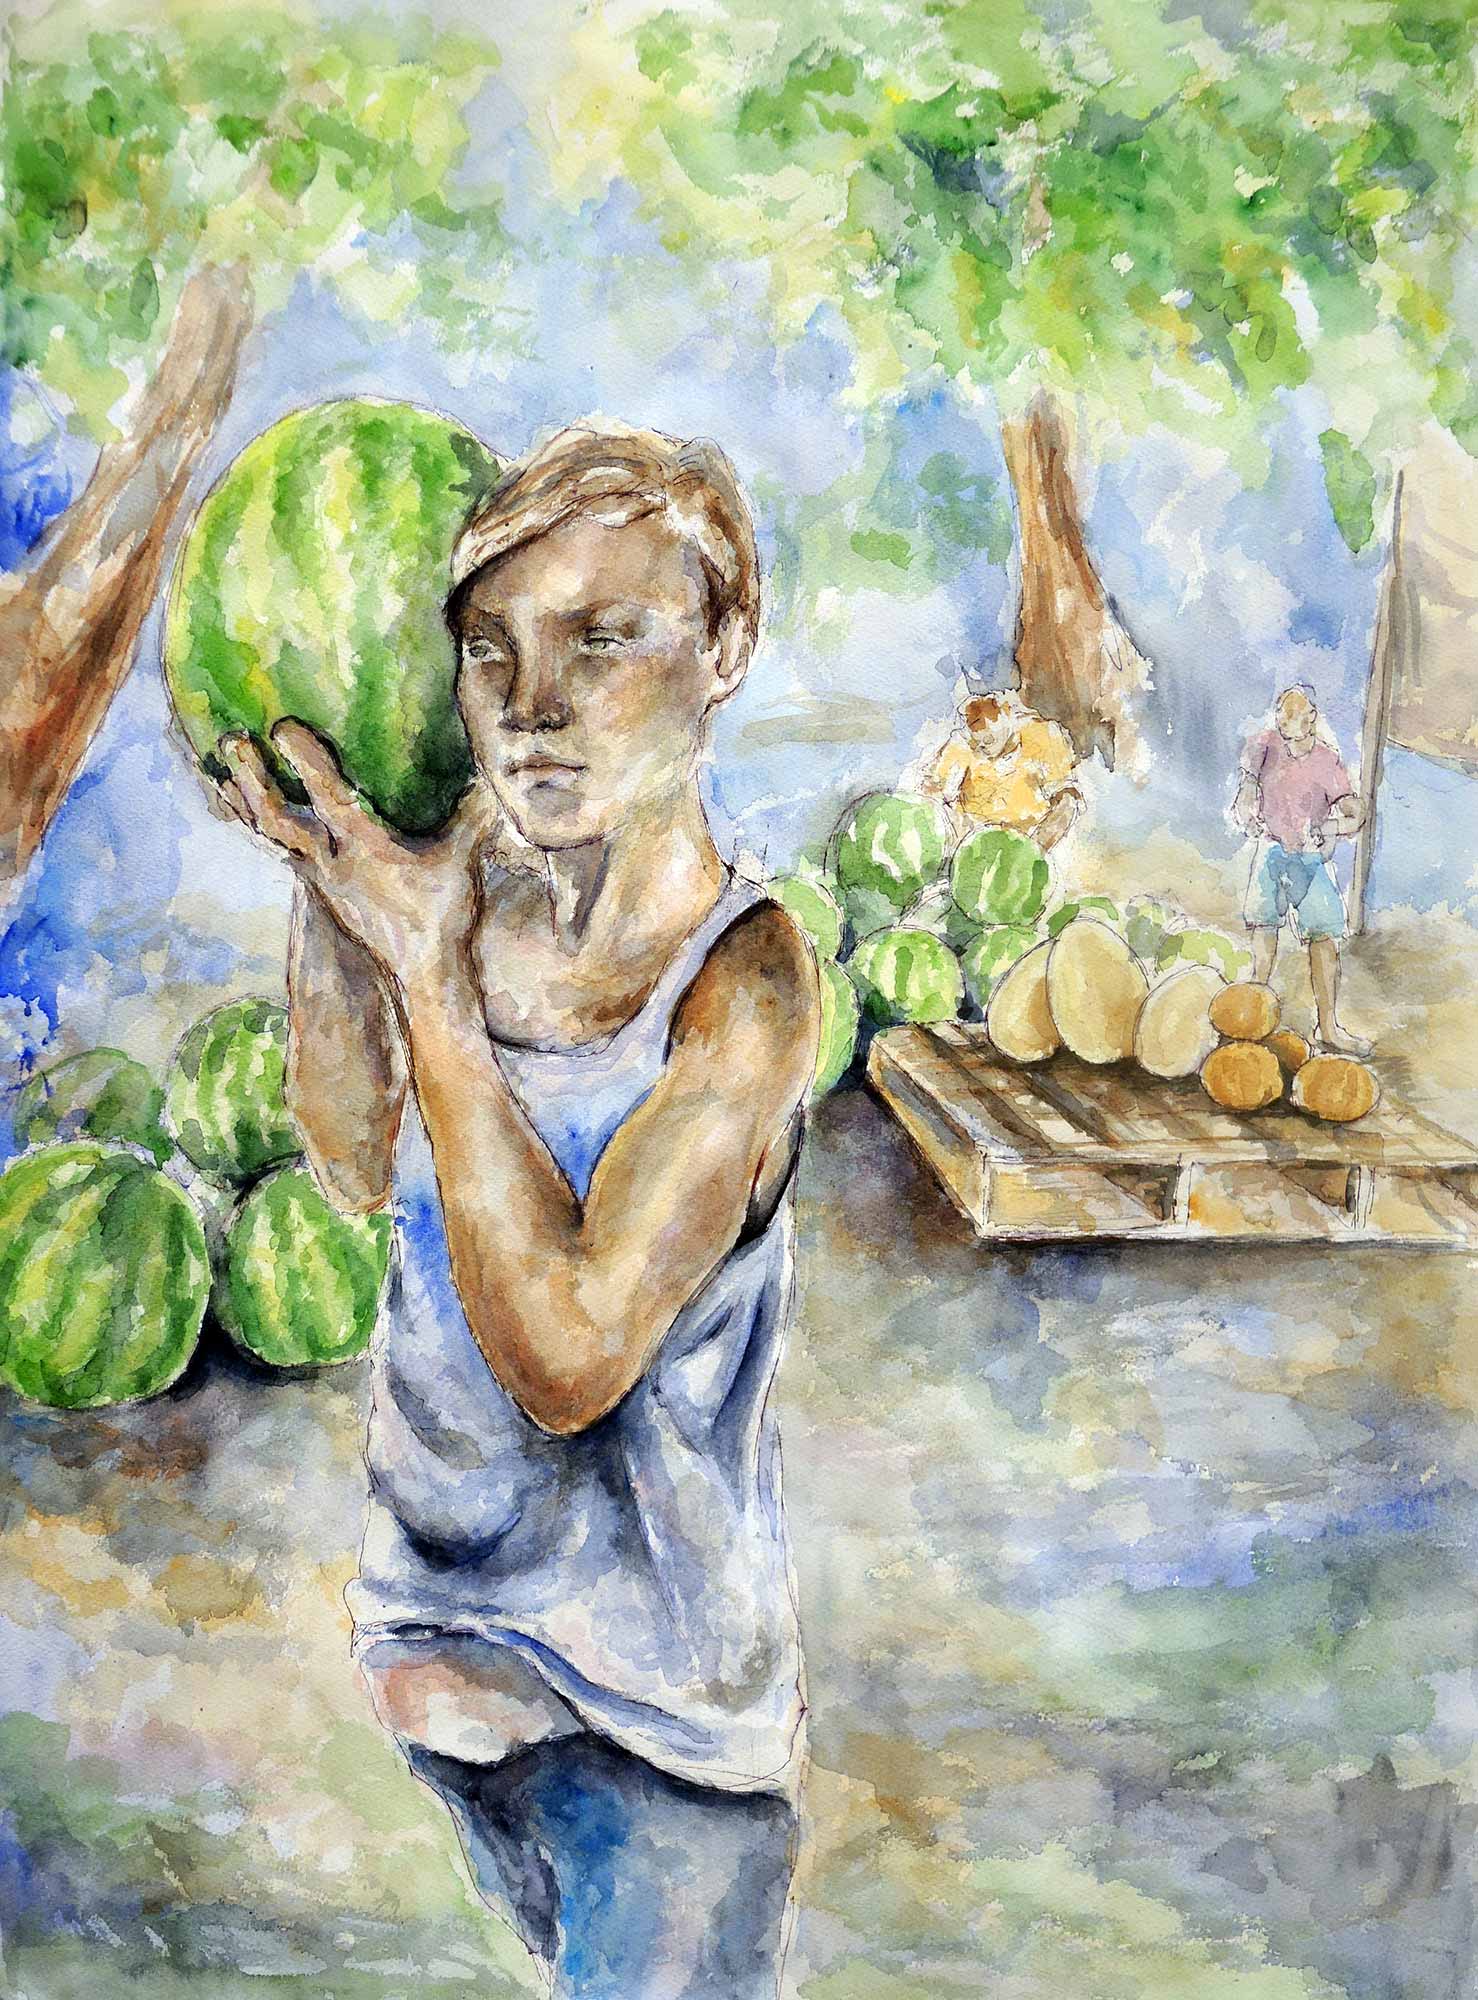 A painting of a boy holding a watermelon